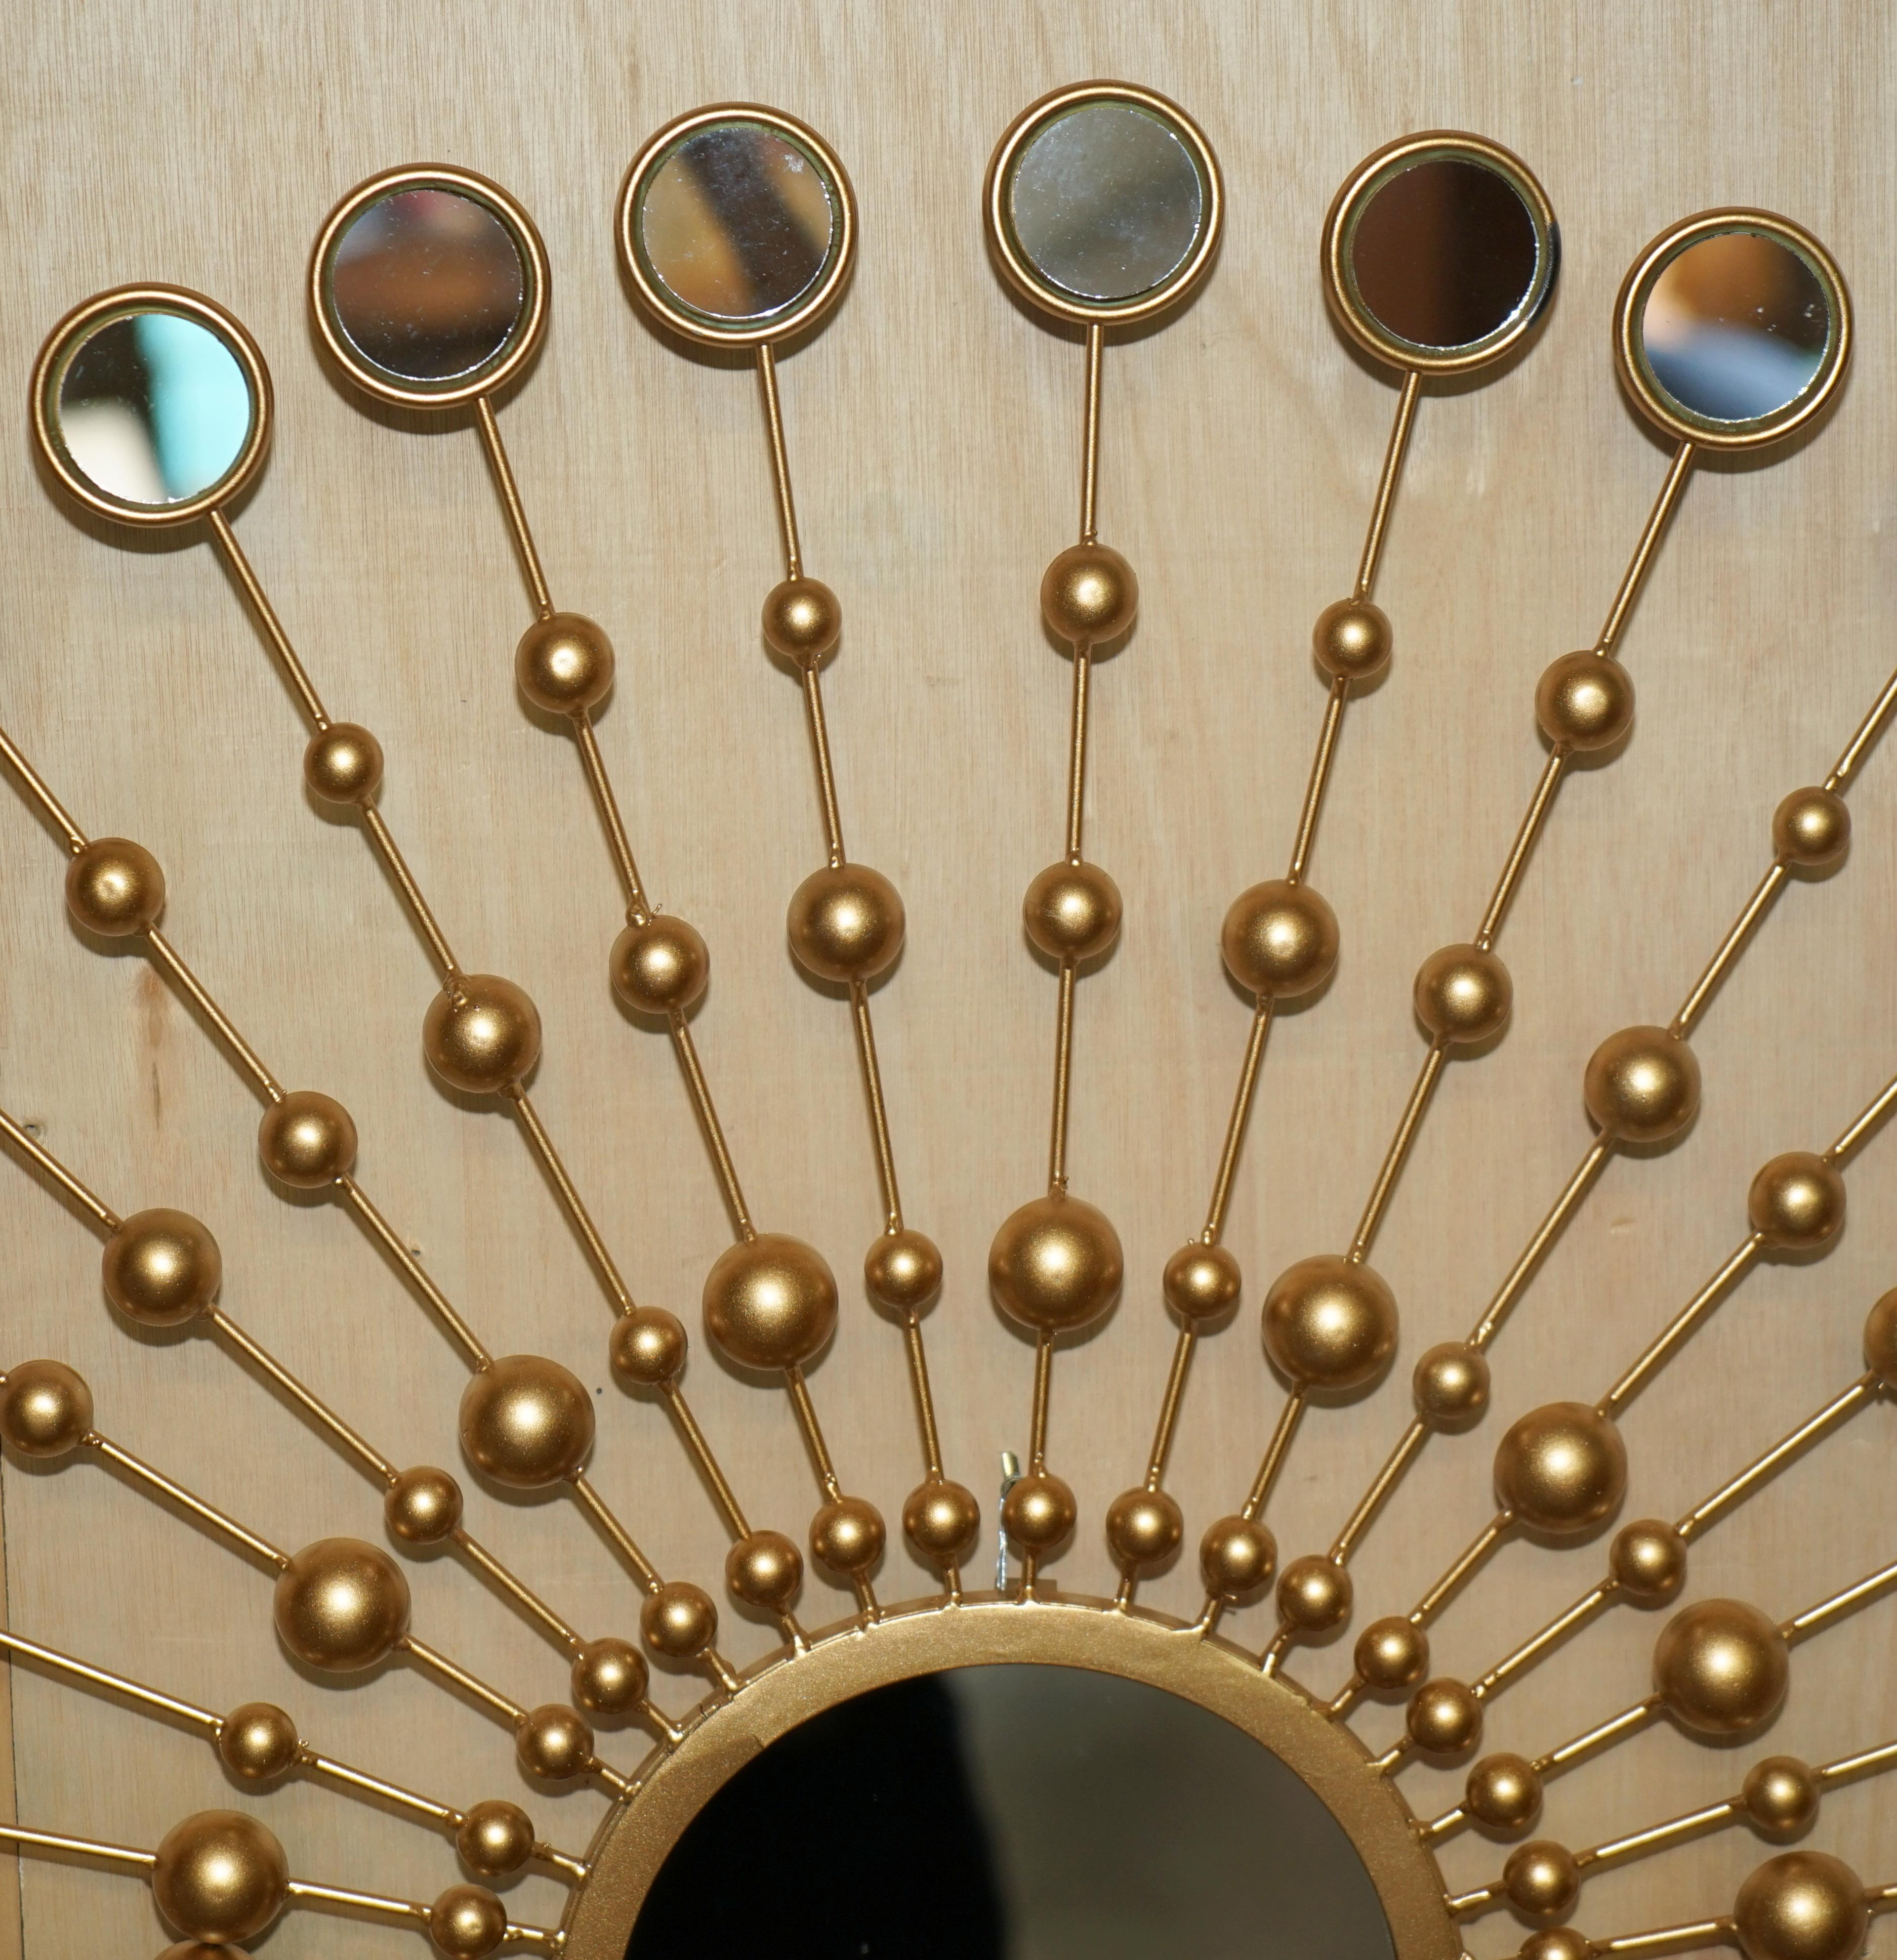 Hand-Crafted LOVELY LOOKiNG DECORATIVE LARGE WALL MIRROR WITH 36 SMALL MIRRORS IN A SUN FORM For Sale